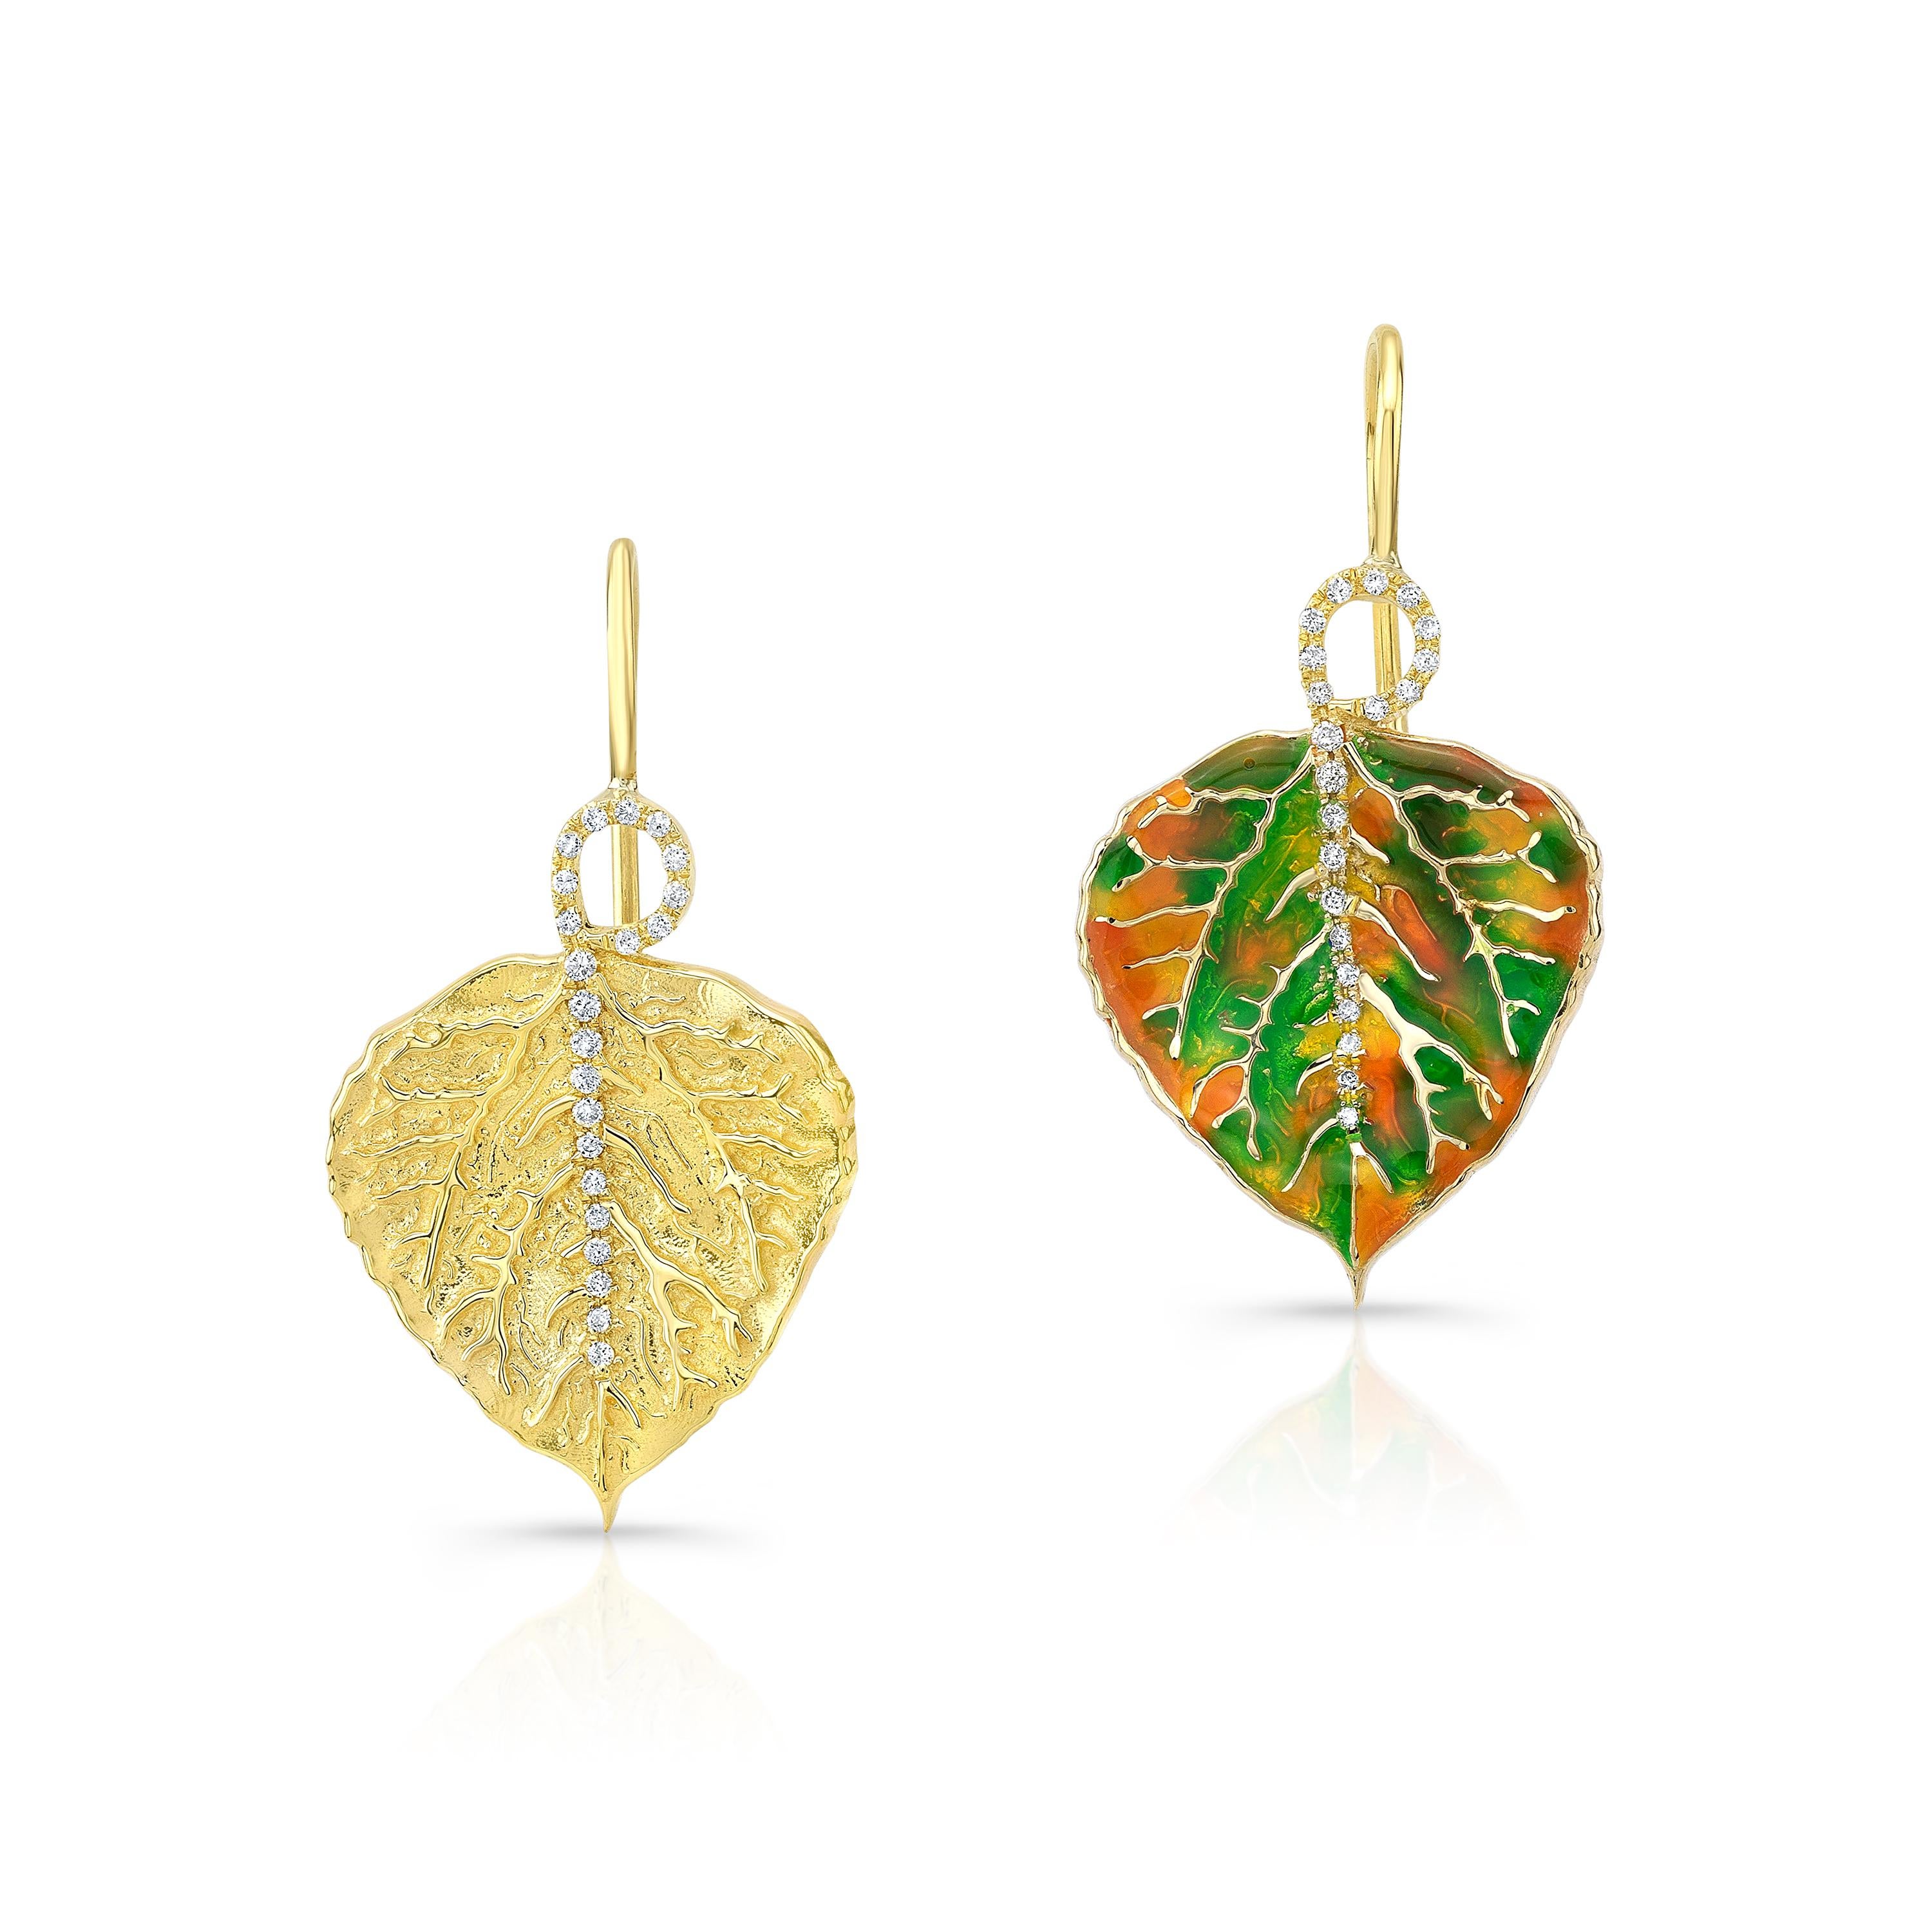 Amy Y’s contemporary 18K-gold, diamond, and enamel Aspen Leafs are one-of-a-kind gems for life. They are beautifully detailed in multicolored hand-painted enamel to capture the essence of the Rockie Mountains gorgeous Aspen trees Fall colors. 